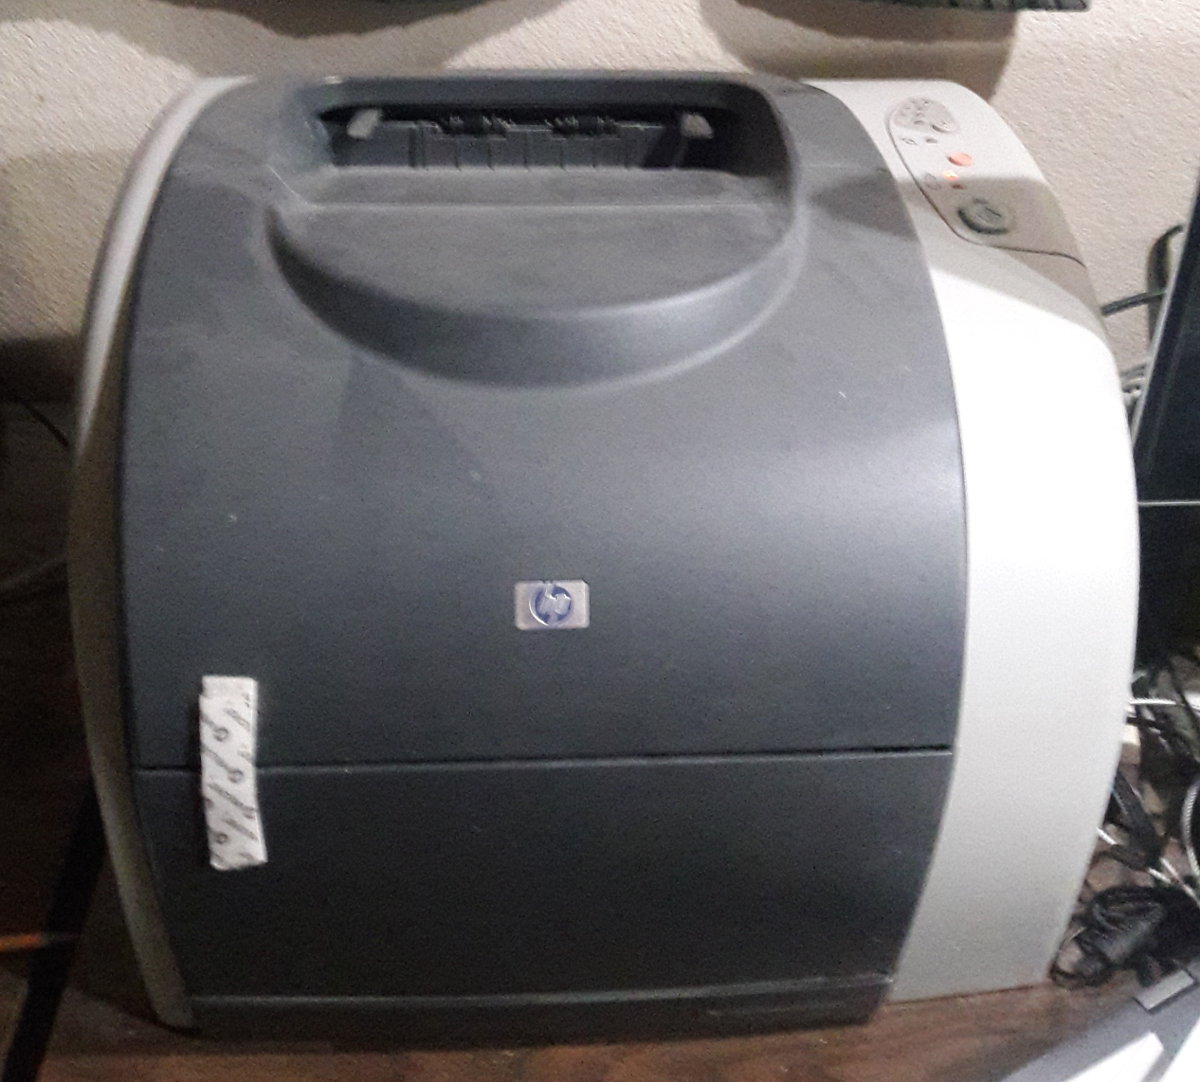 A picture of my old dinosaur printer, also from HP (an L2550 color laser printer)